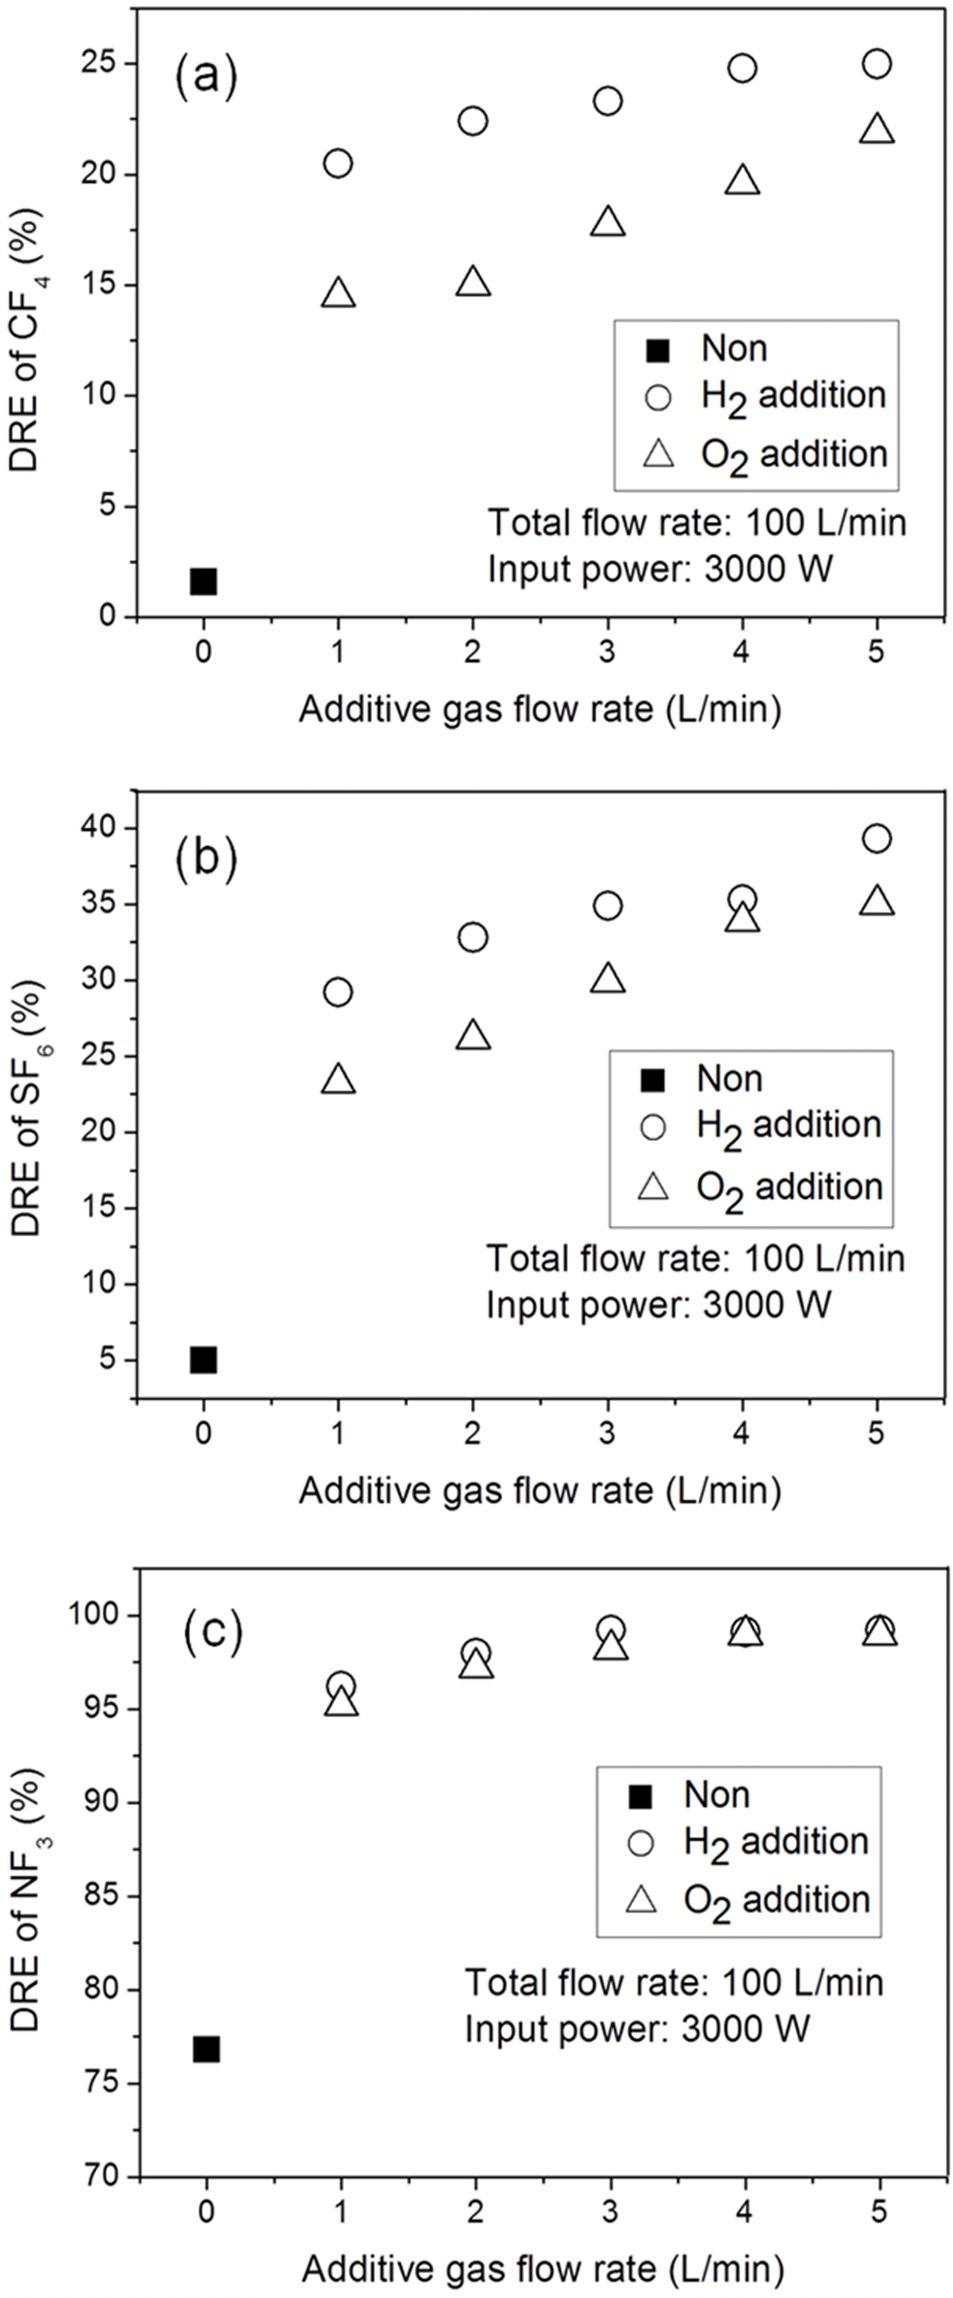 DRE of PFCs according to additional gas flow rate at fixed waste gas flow rate of 100 L/min: (a) CF4 (b) SF6 (c) NF3.